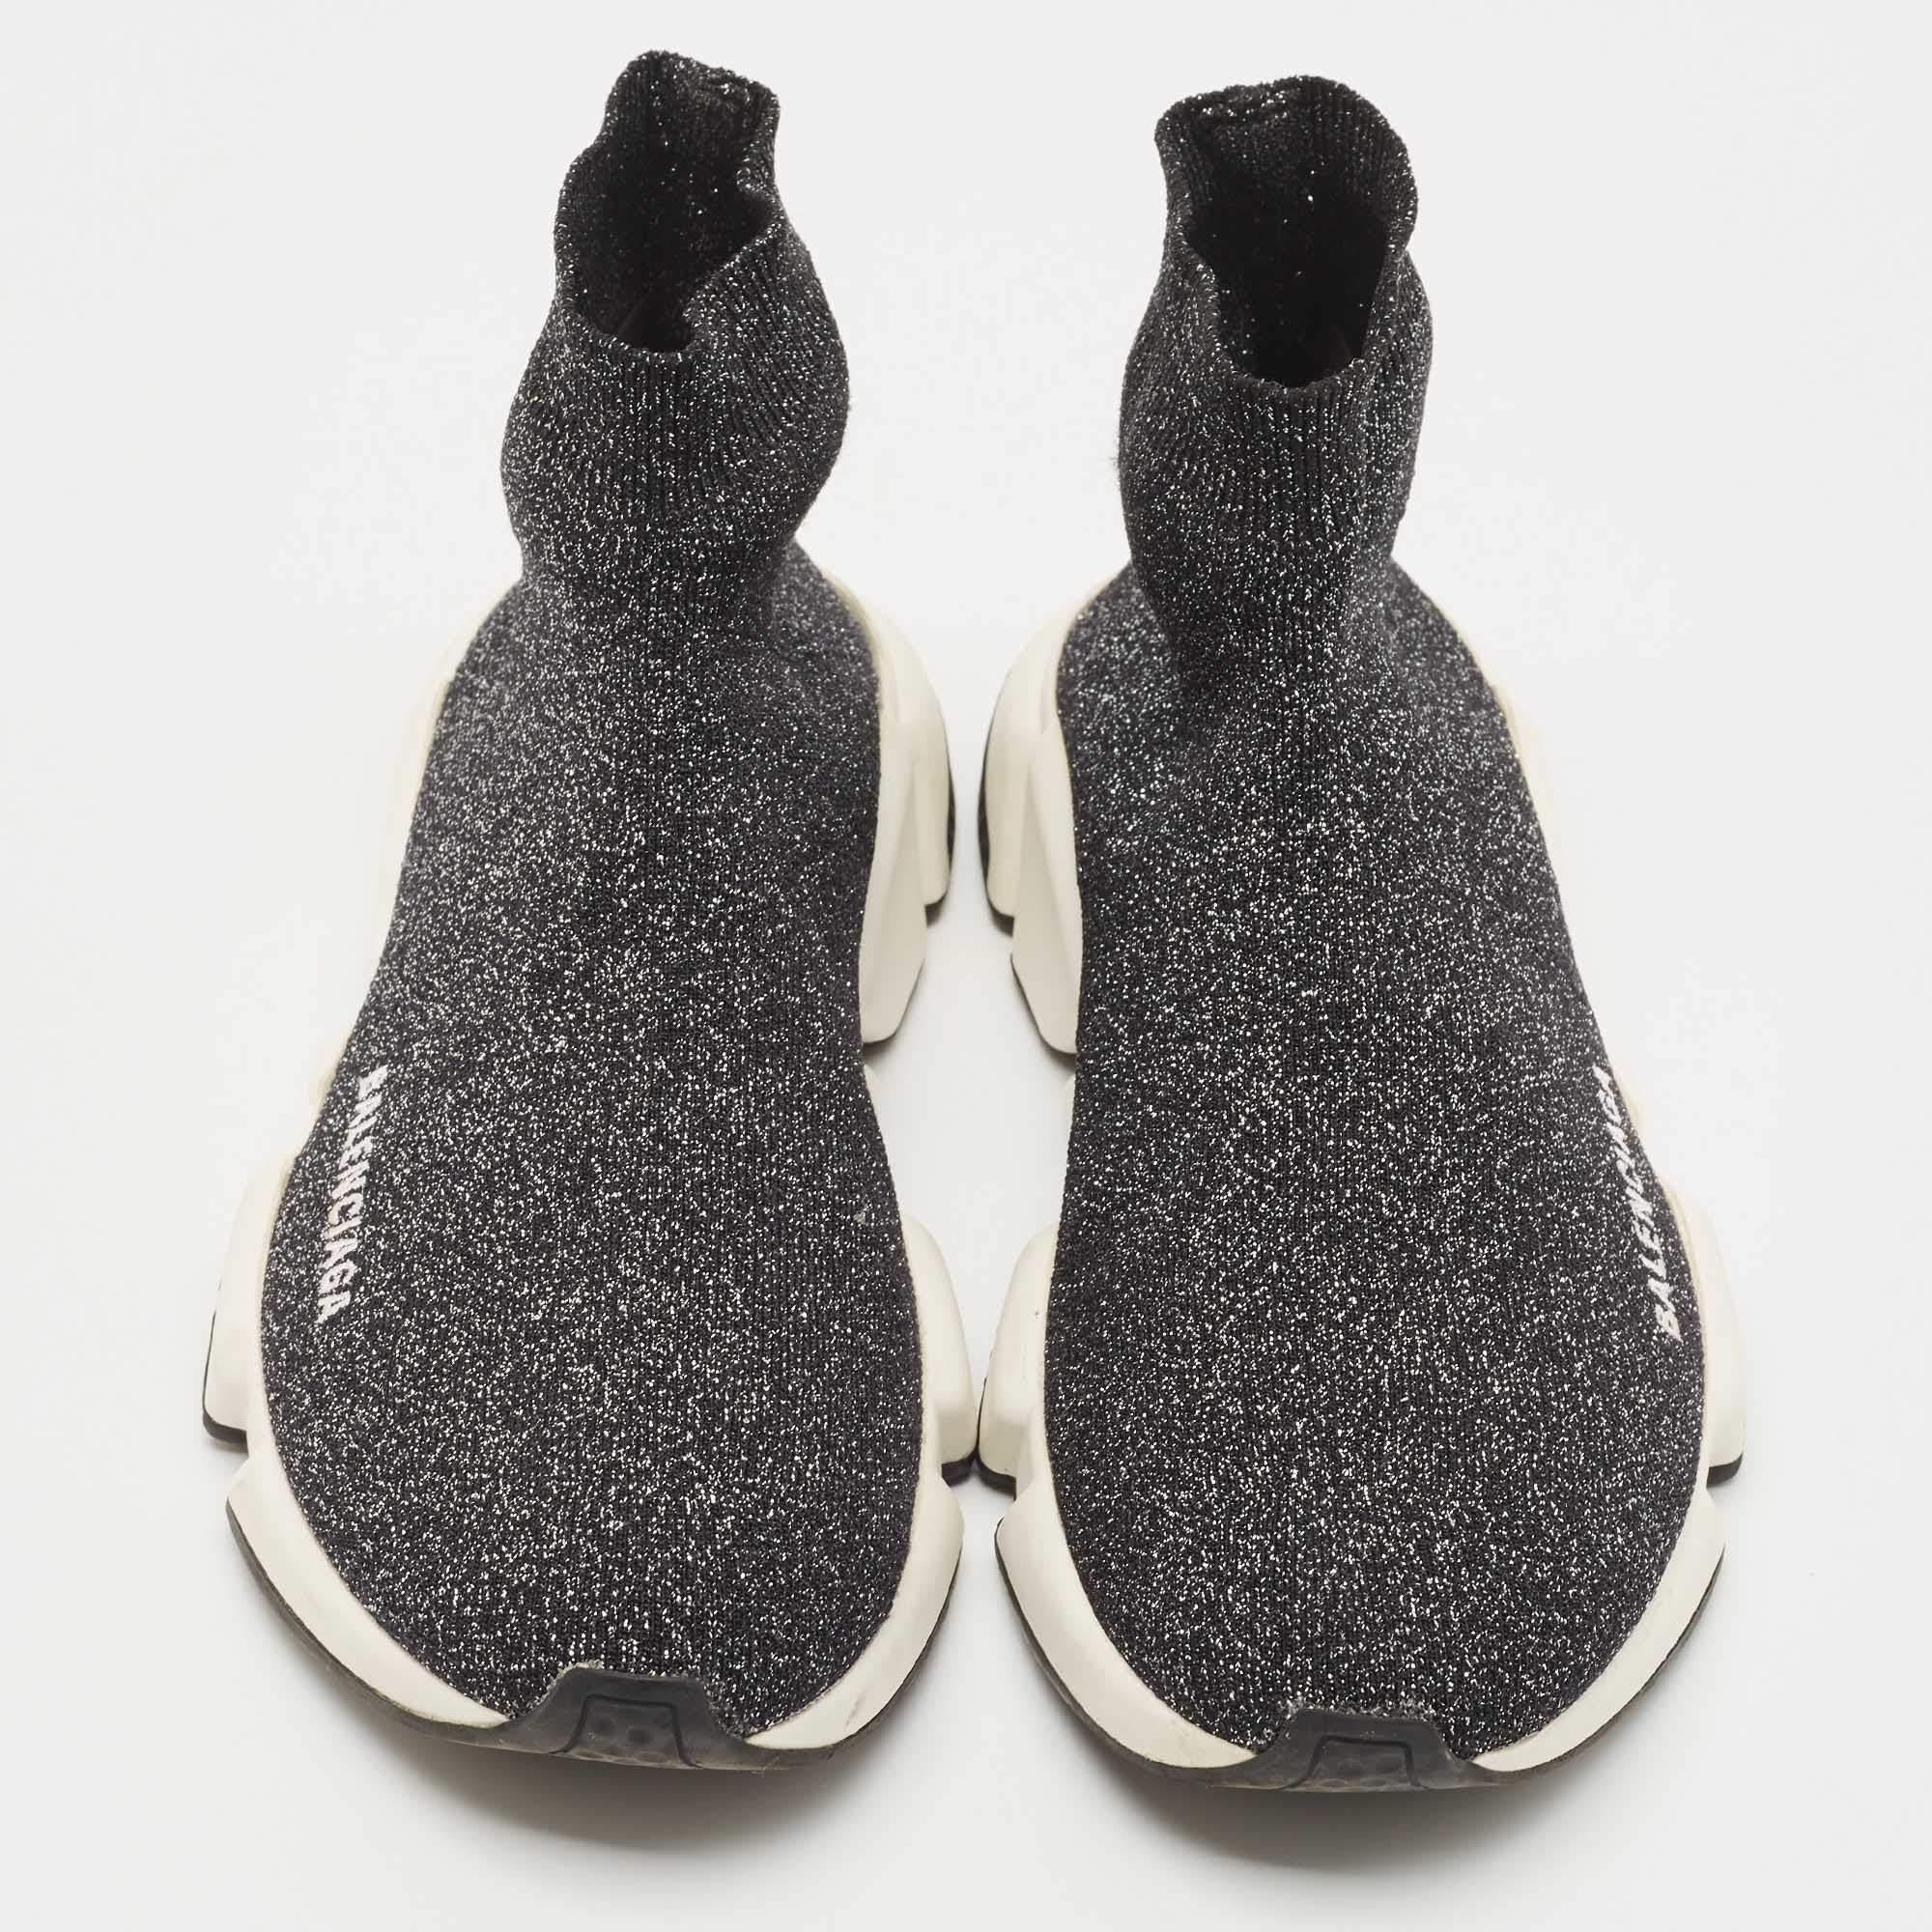 Celebrating the fusion of sports and luxury fashion, these Balenciaga Speed Trainer sneakers are absolutely worth the splurge. They are laceless and so well-crafted with knit fabric in a sock style. The sneakers are also designed with shock